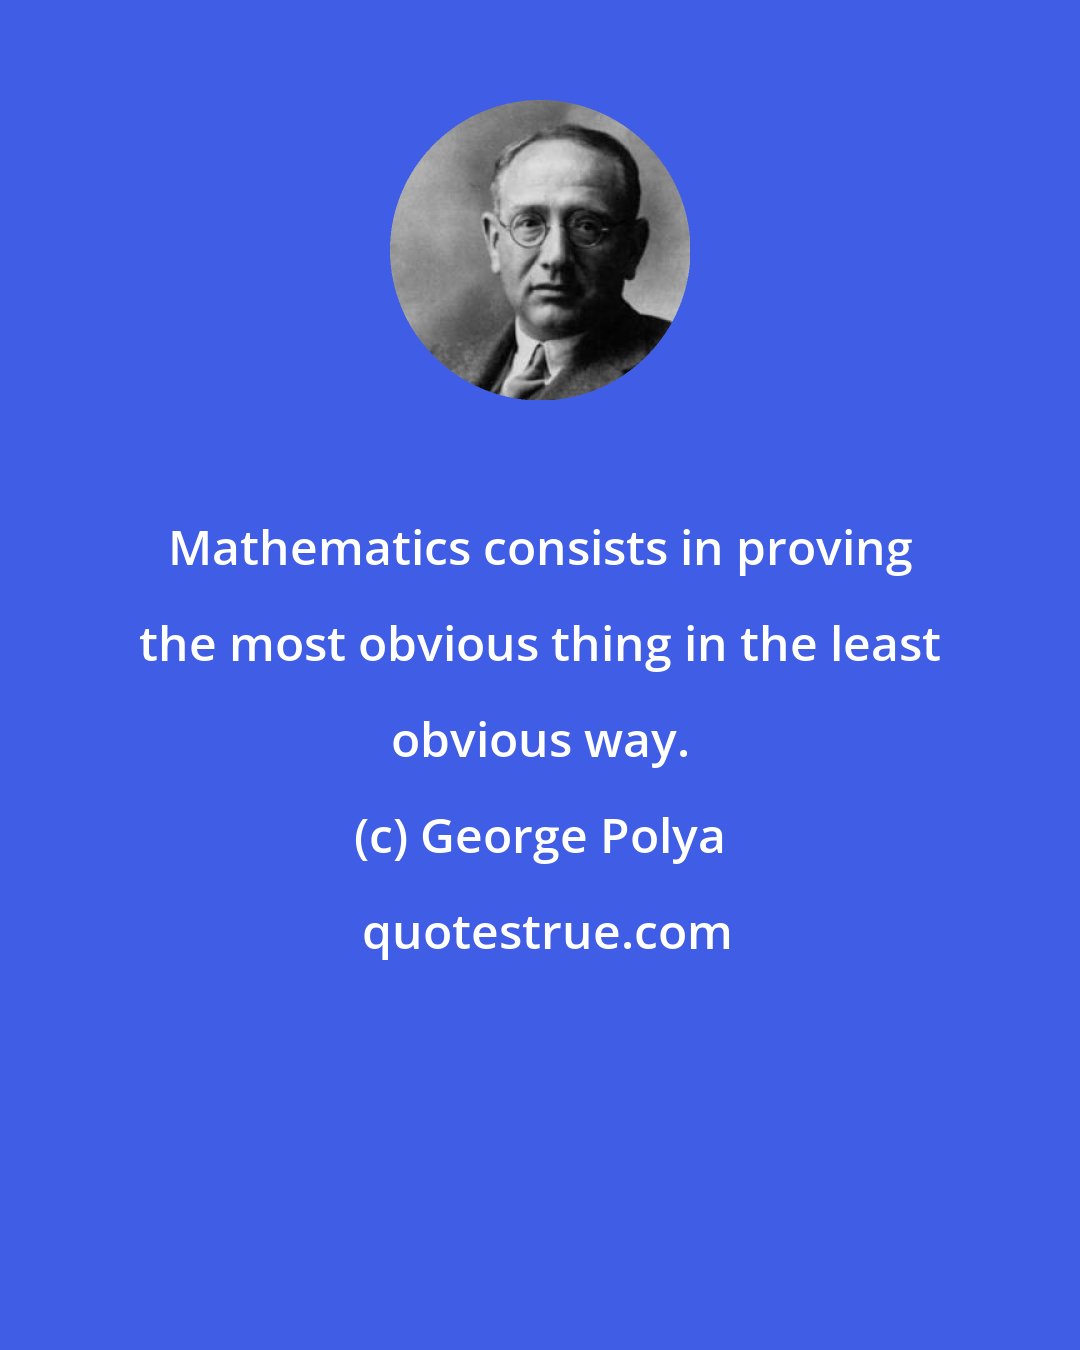 George Polya: Mathematics consists in proving the most obvious thing in the least obvious way.